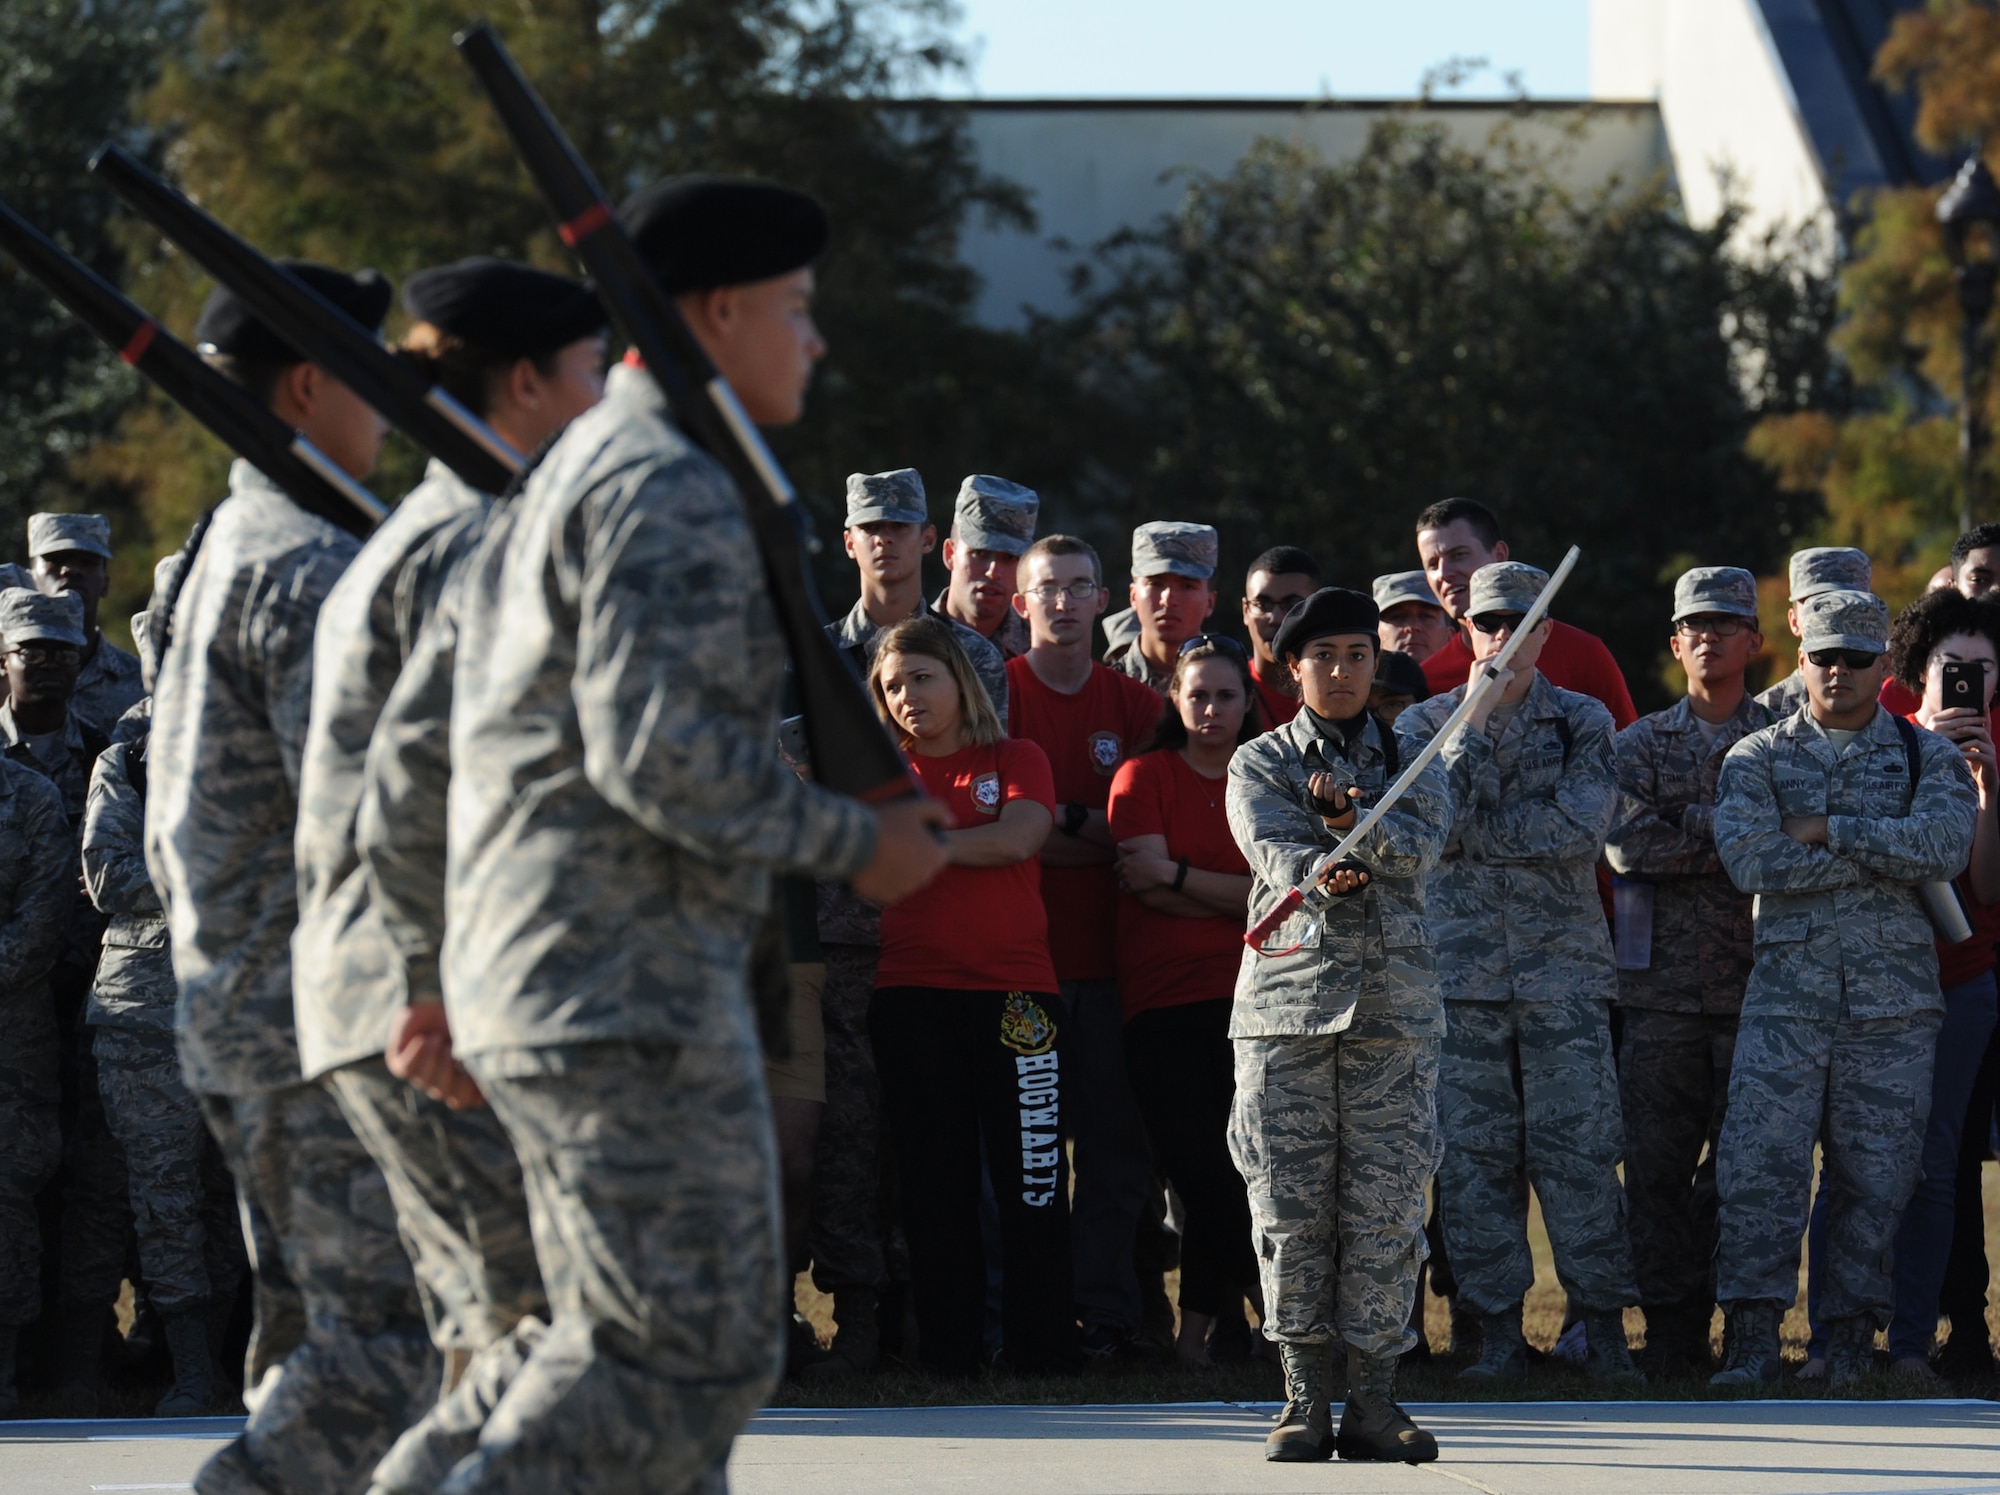 Airman Basic Sierra Guitron, 336th Training Squadron freestyle drill team member, spins a sword during the 81st Training Group drill down at the Levitow Training Support Facility drill pad Nov. 4, 2016, on Keesler Air Force Base, Miss. The quarterly drill down featured an open ranks inspection, regulation drill routine and freestyle drill routine categories. The 81st TRG’s four non-prior service training squadrons competed in the competition, with the 334th TRS “Gators” taking home the overall first place. (U.S. Air Force photo by Kemberly Groue/Released)